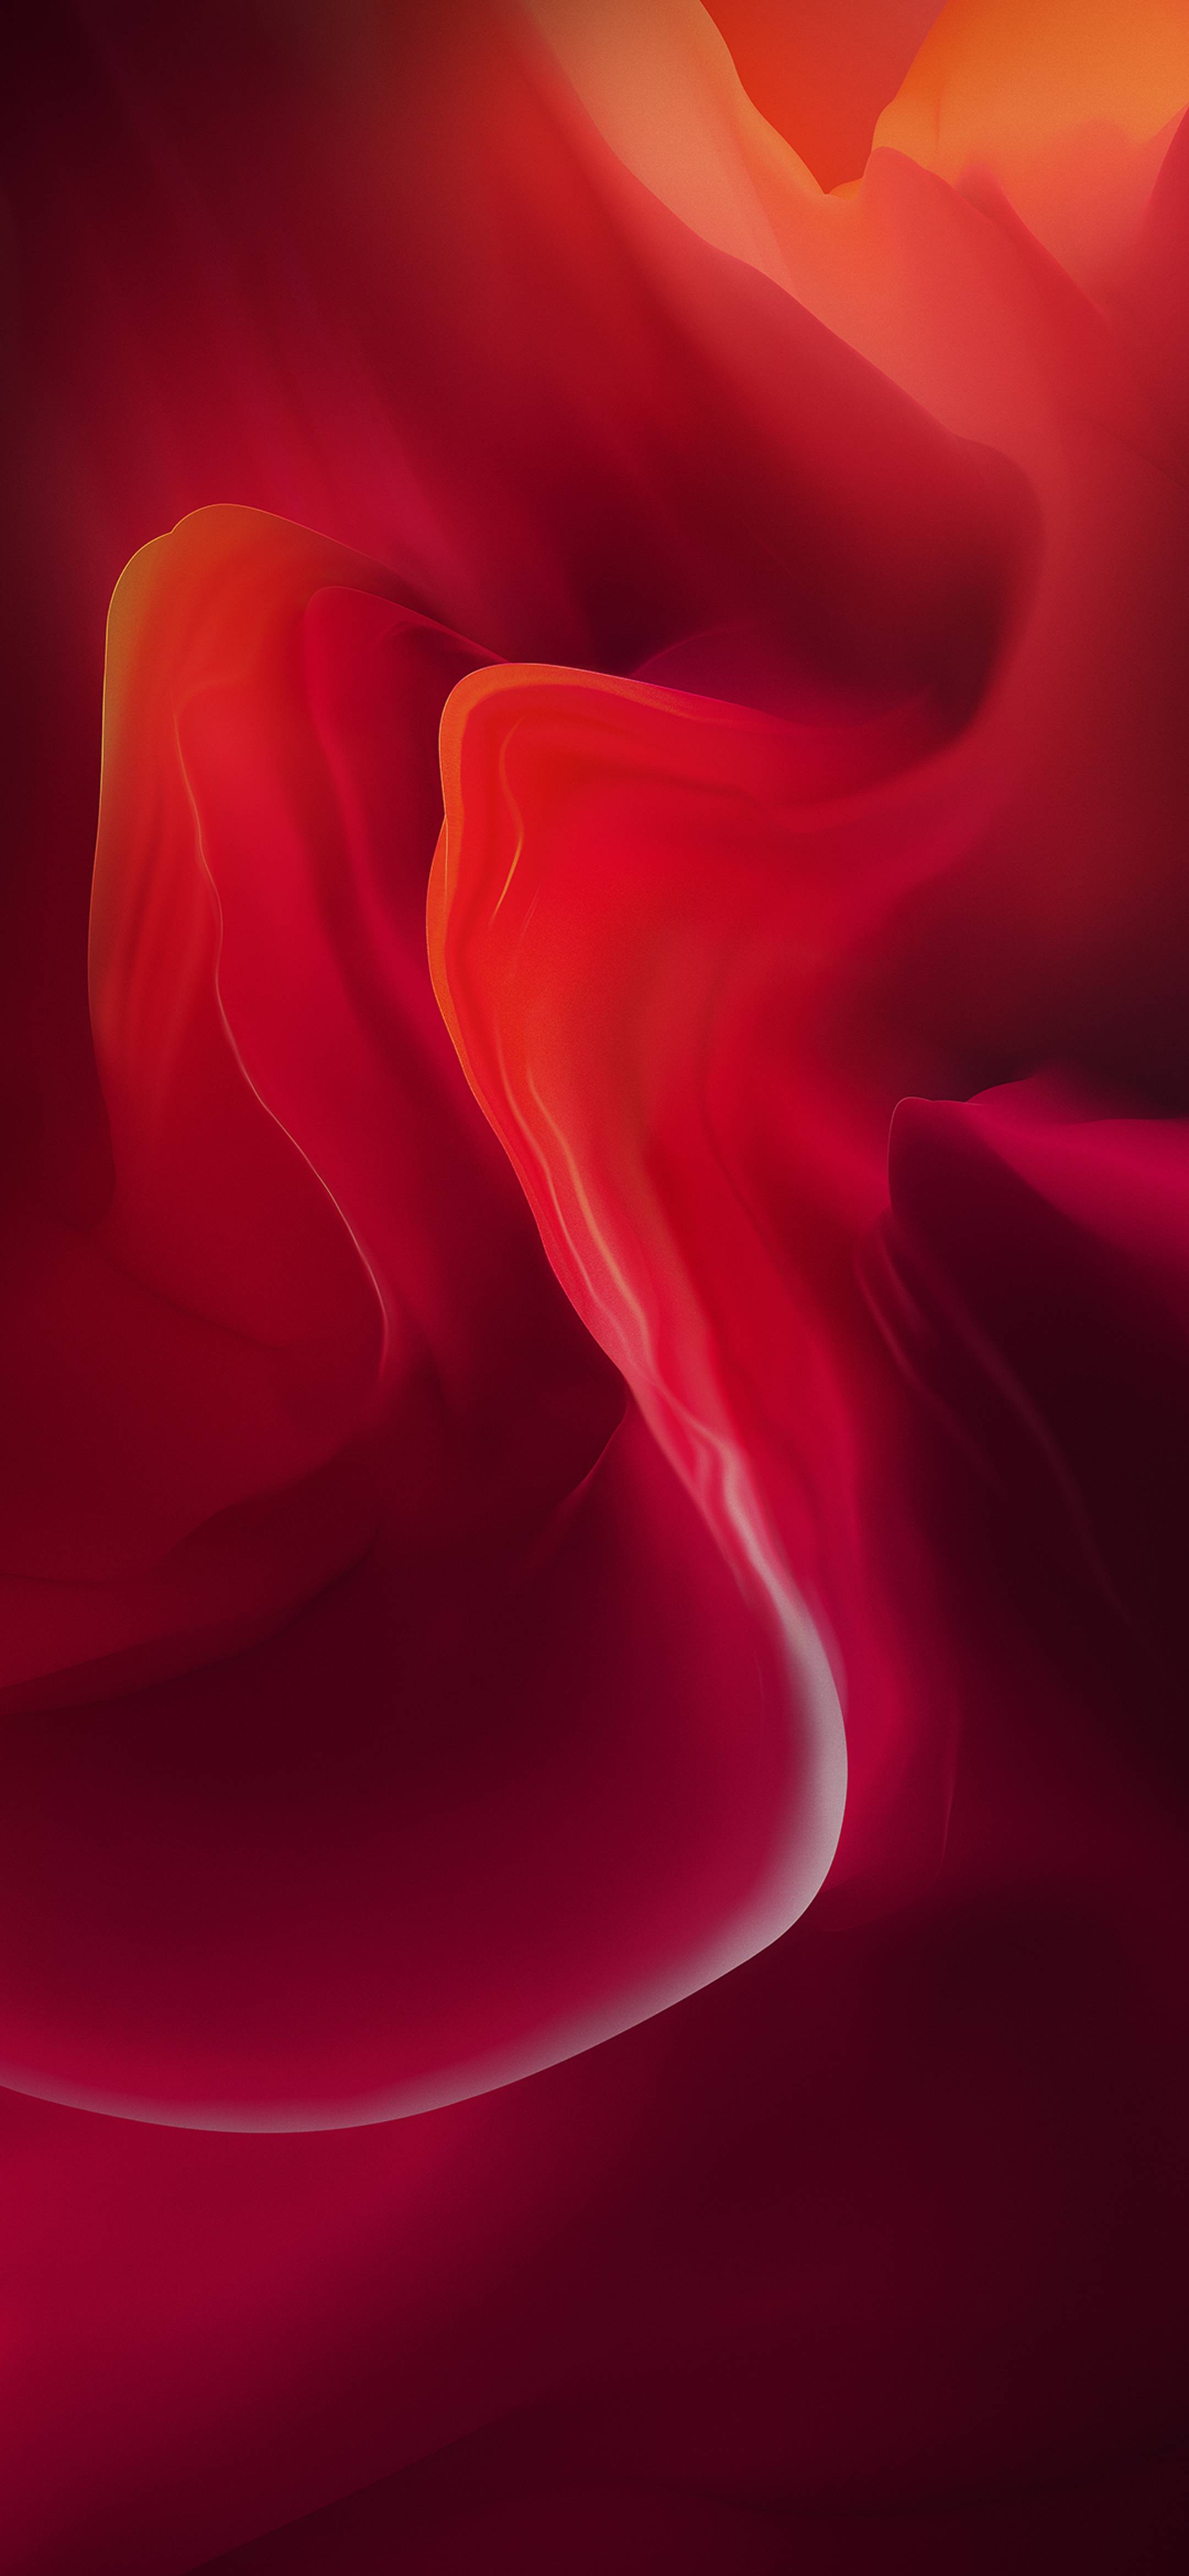 General 2160x4680 red artwork abstract